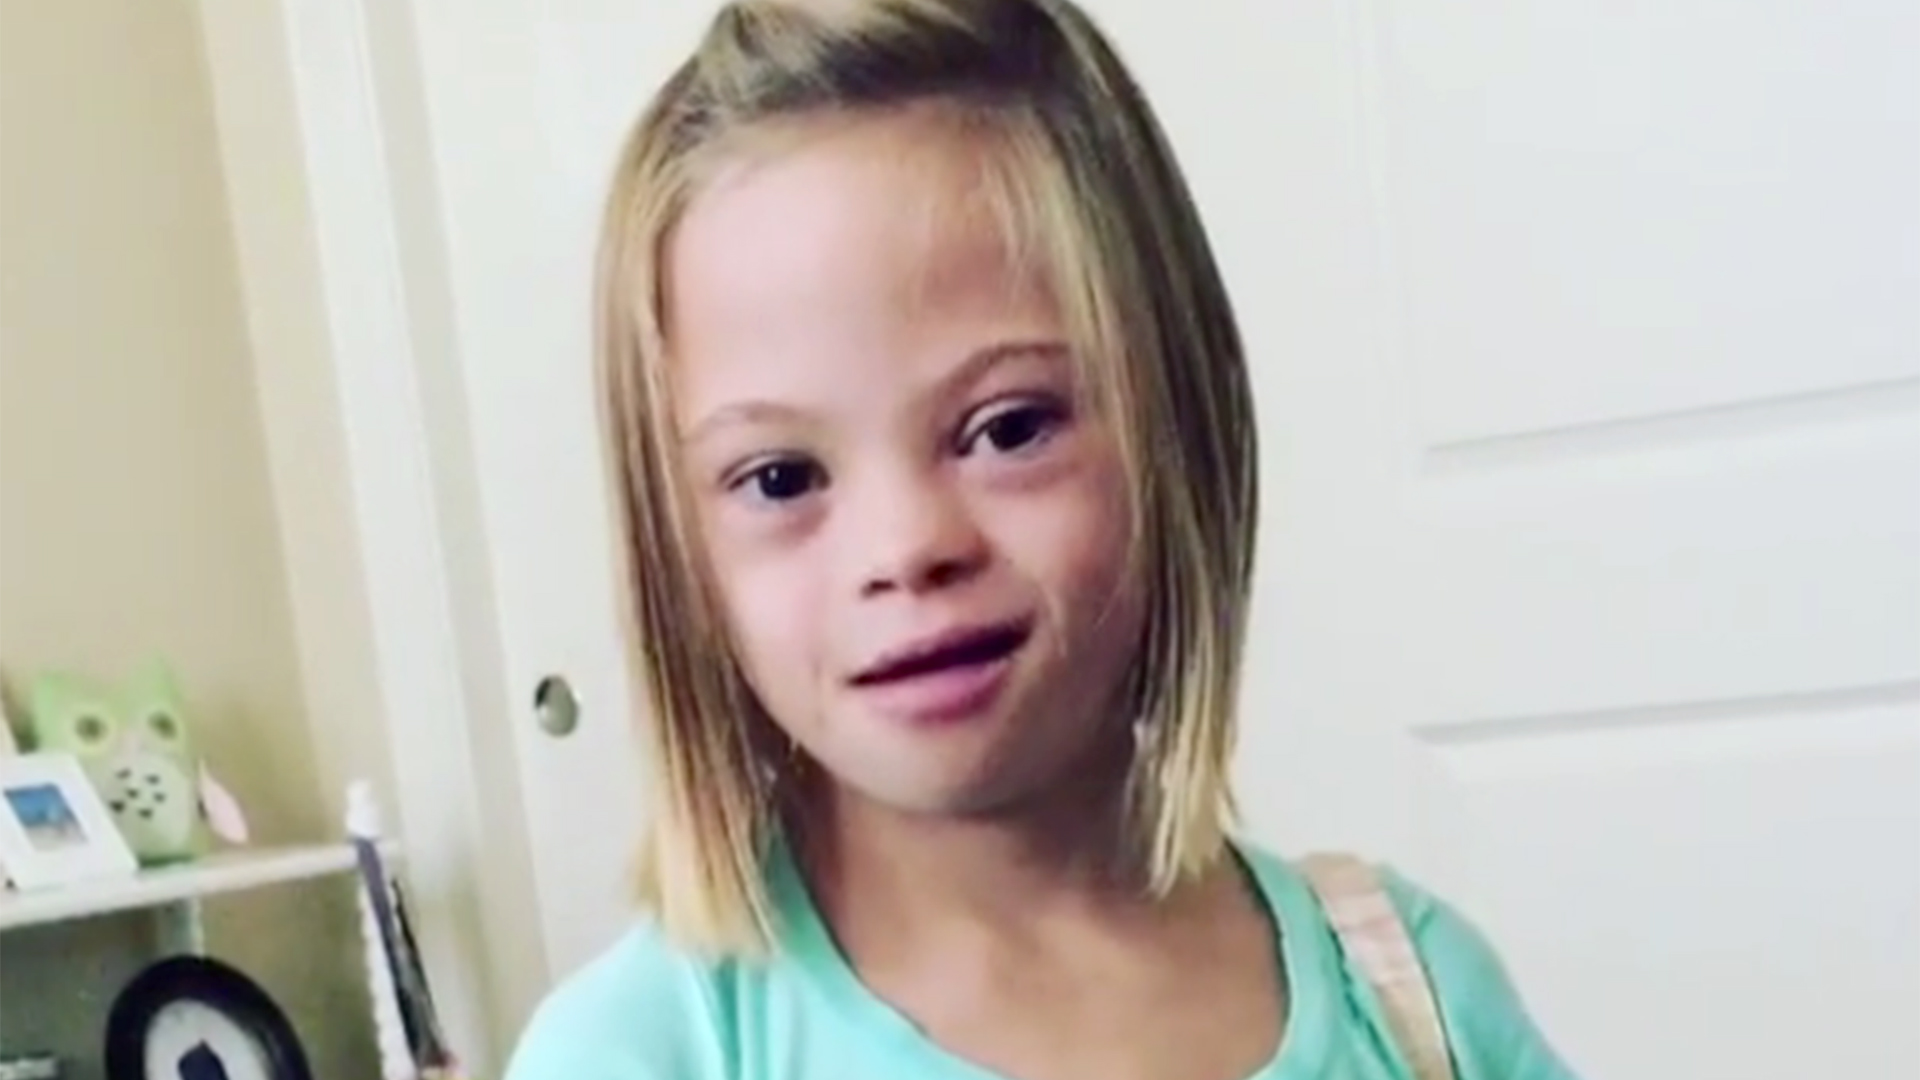 Girl talks about having Down syndrome in viral video - TODAY.com